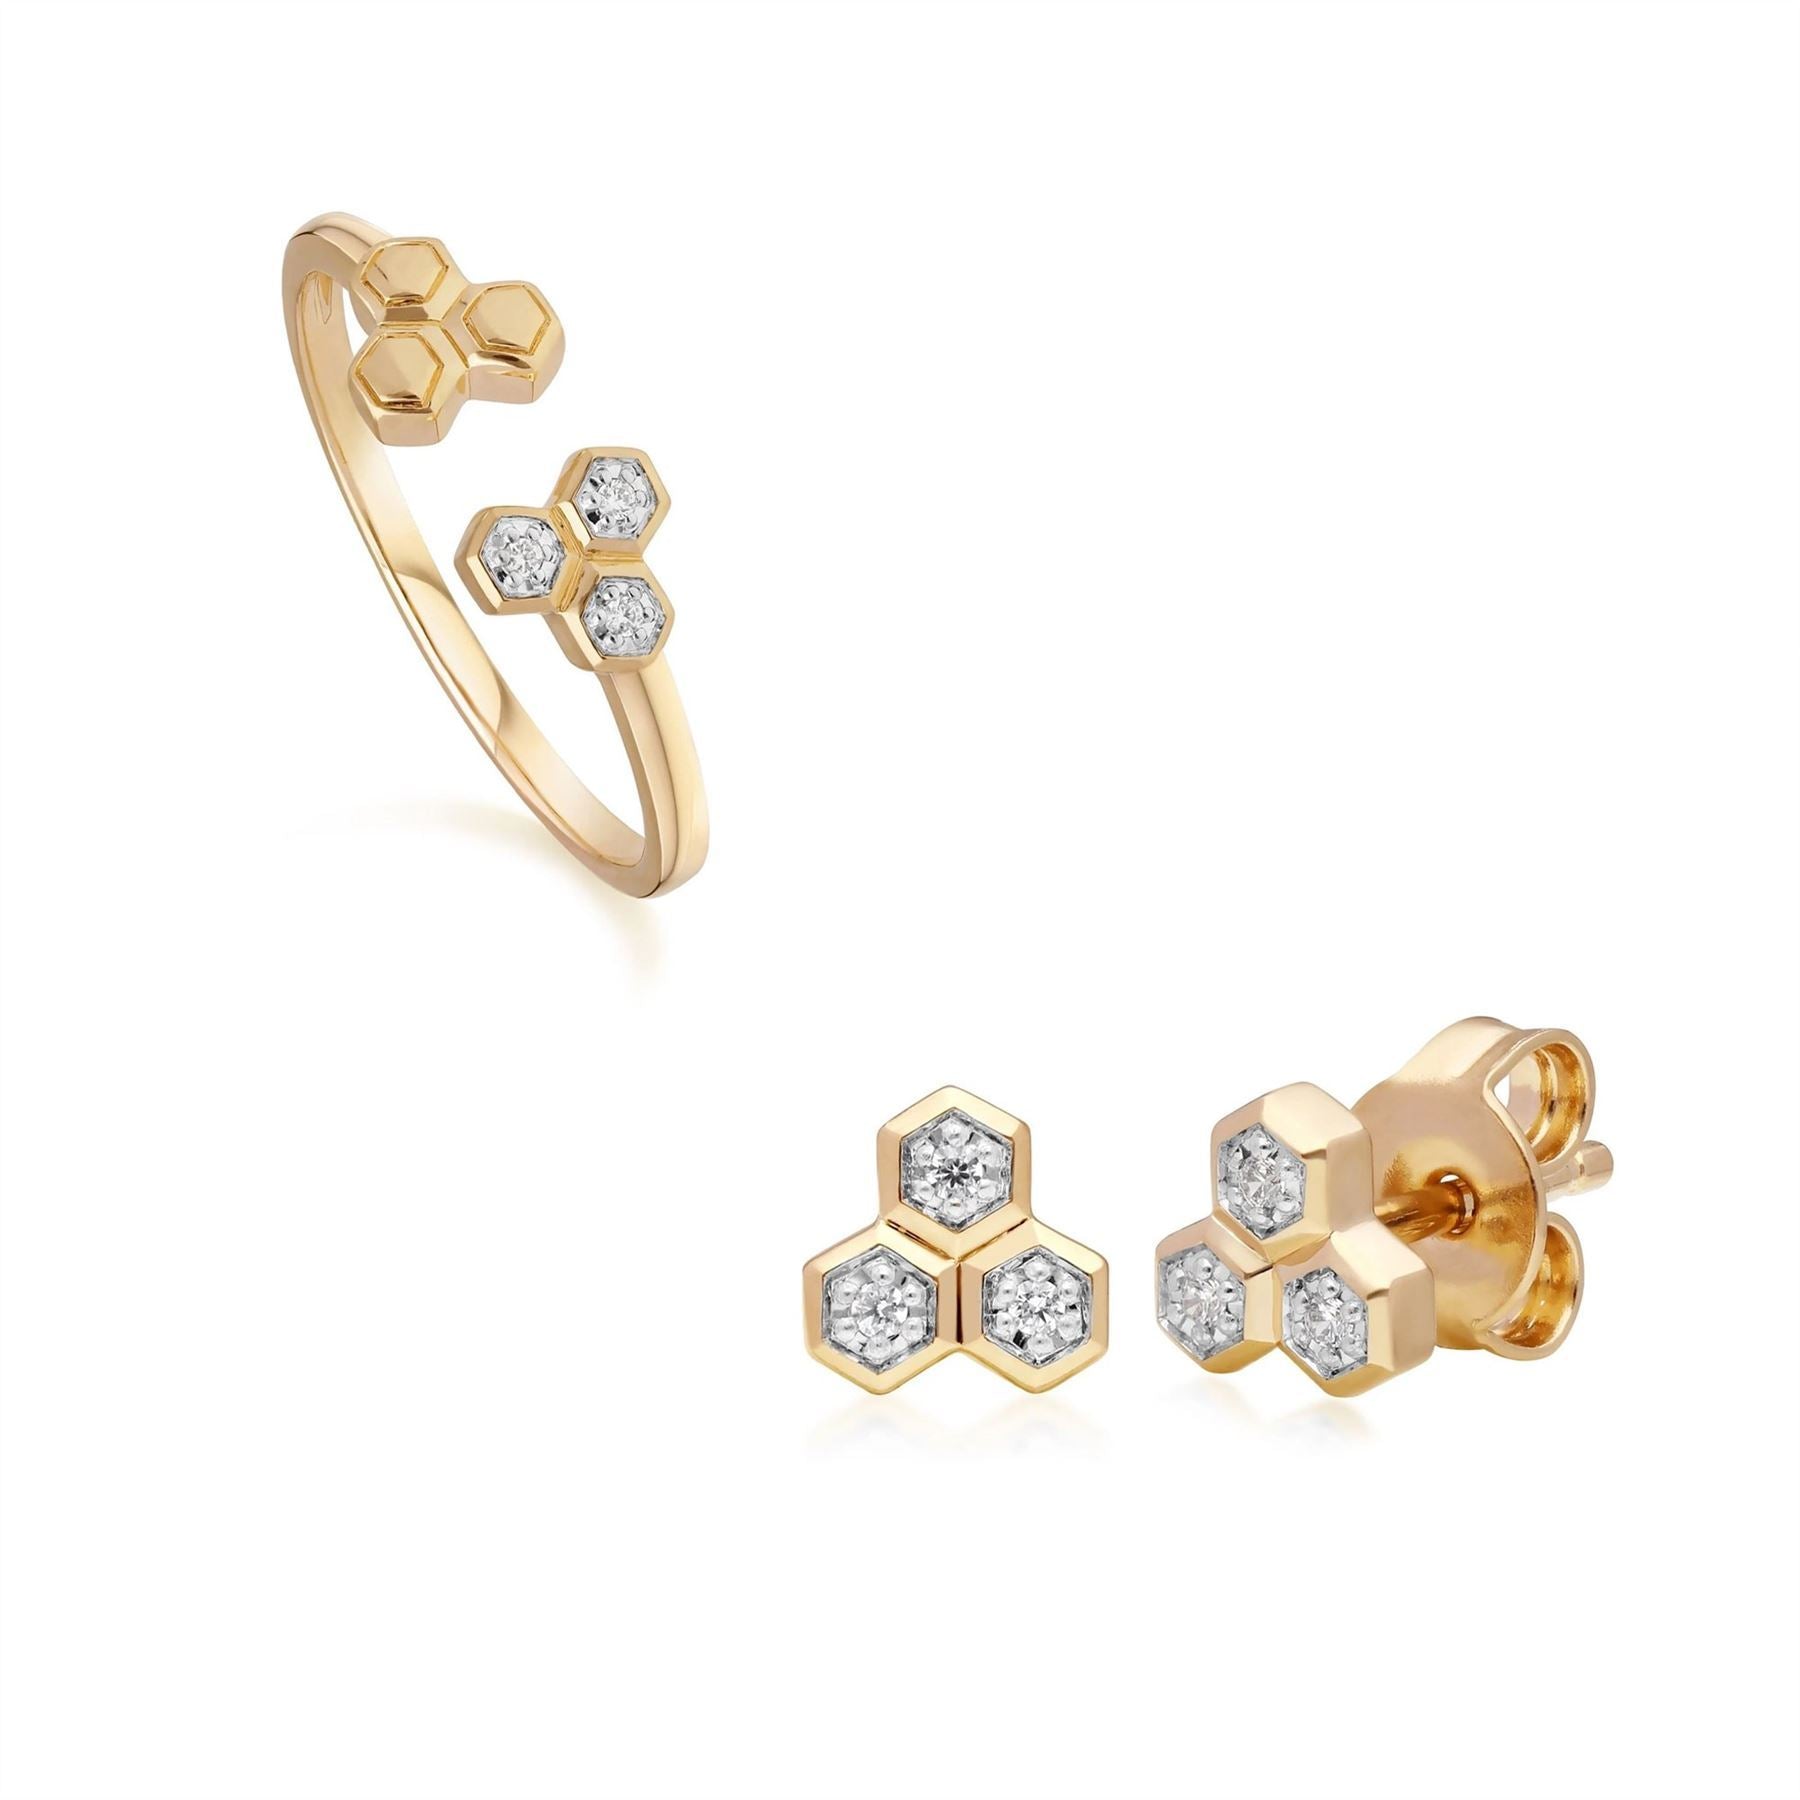 Diamond Trilogy Ring & Stud Earring Set in 9ct Yellow Gold